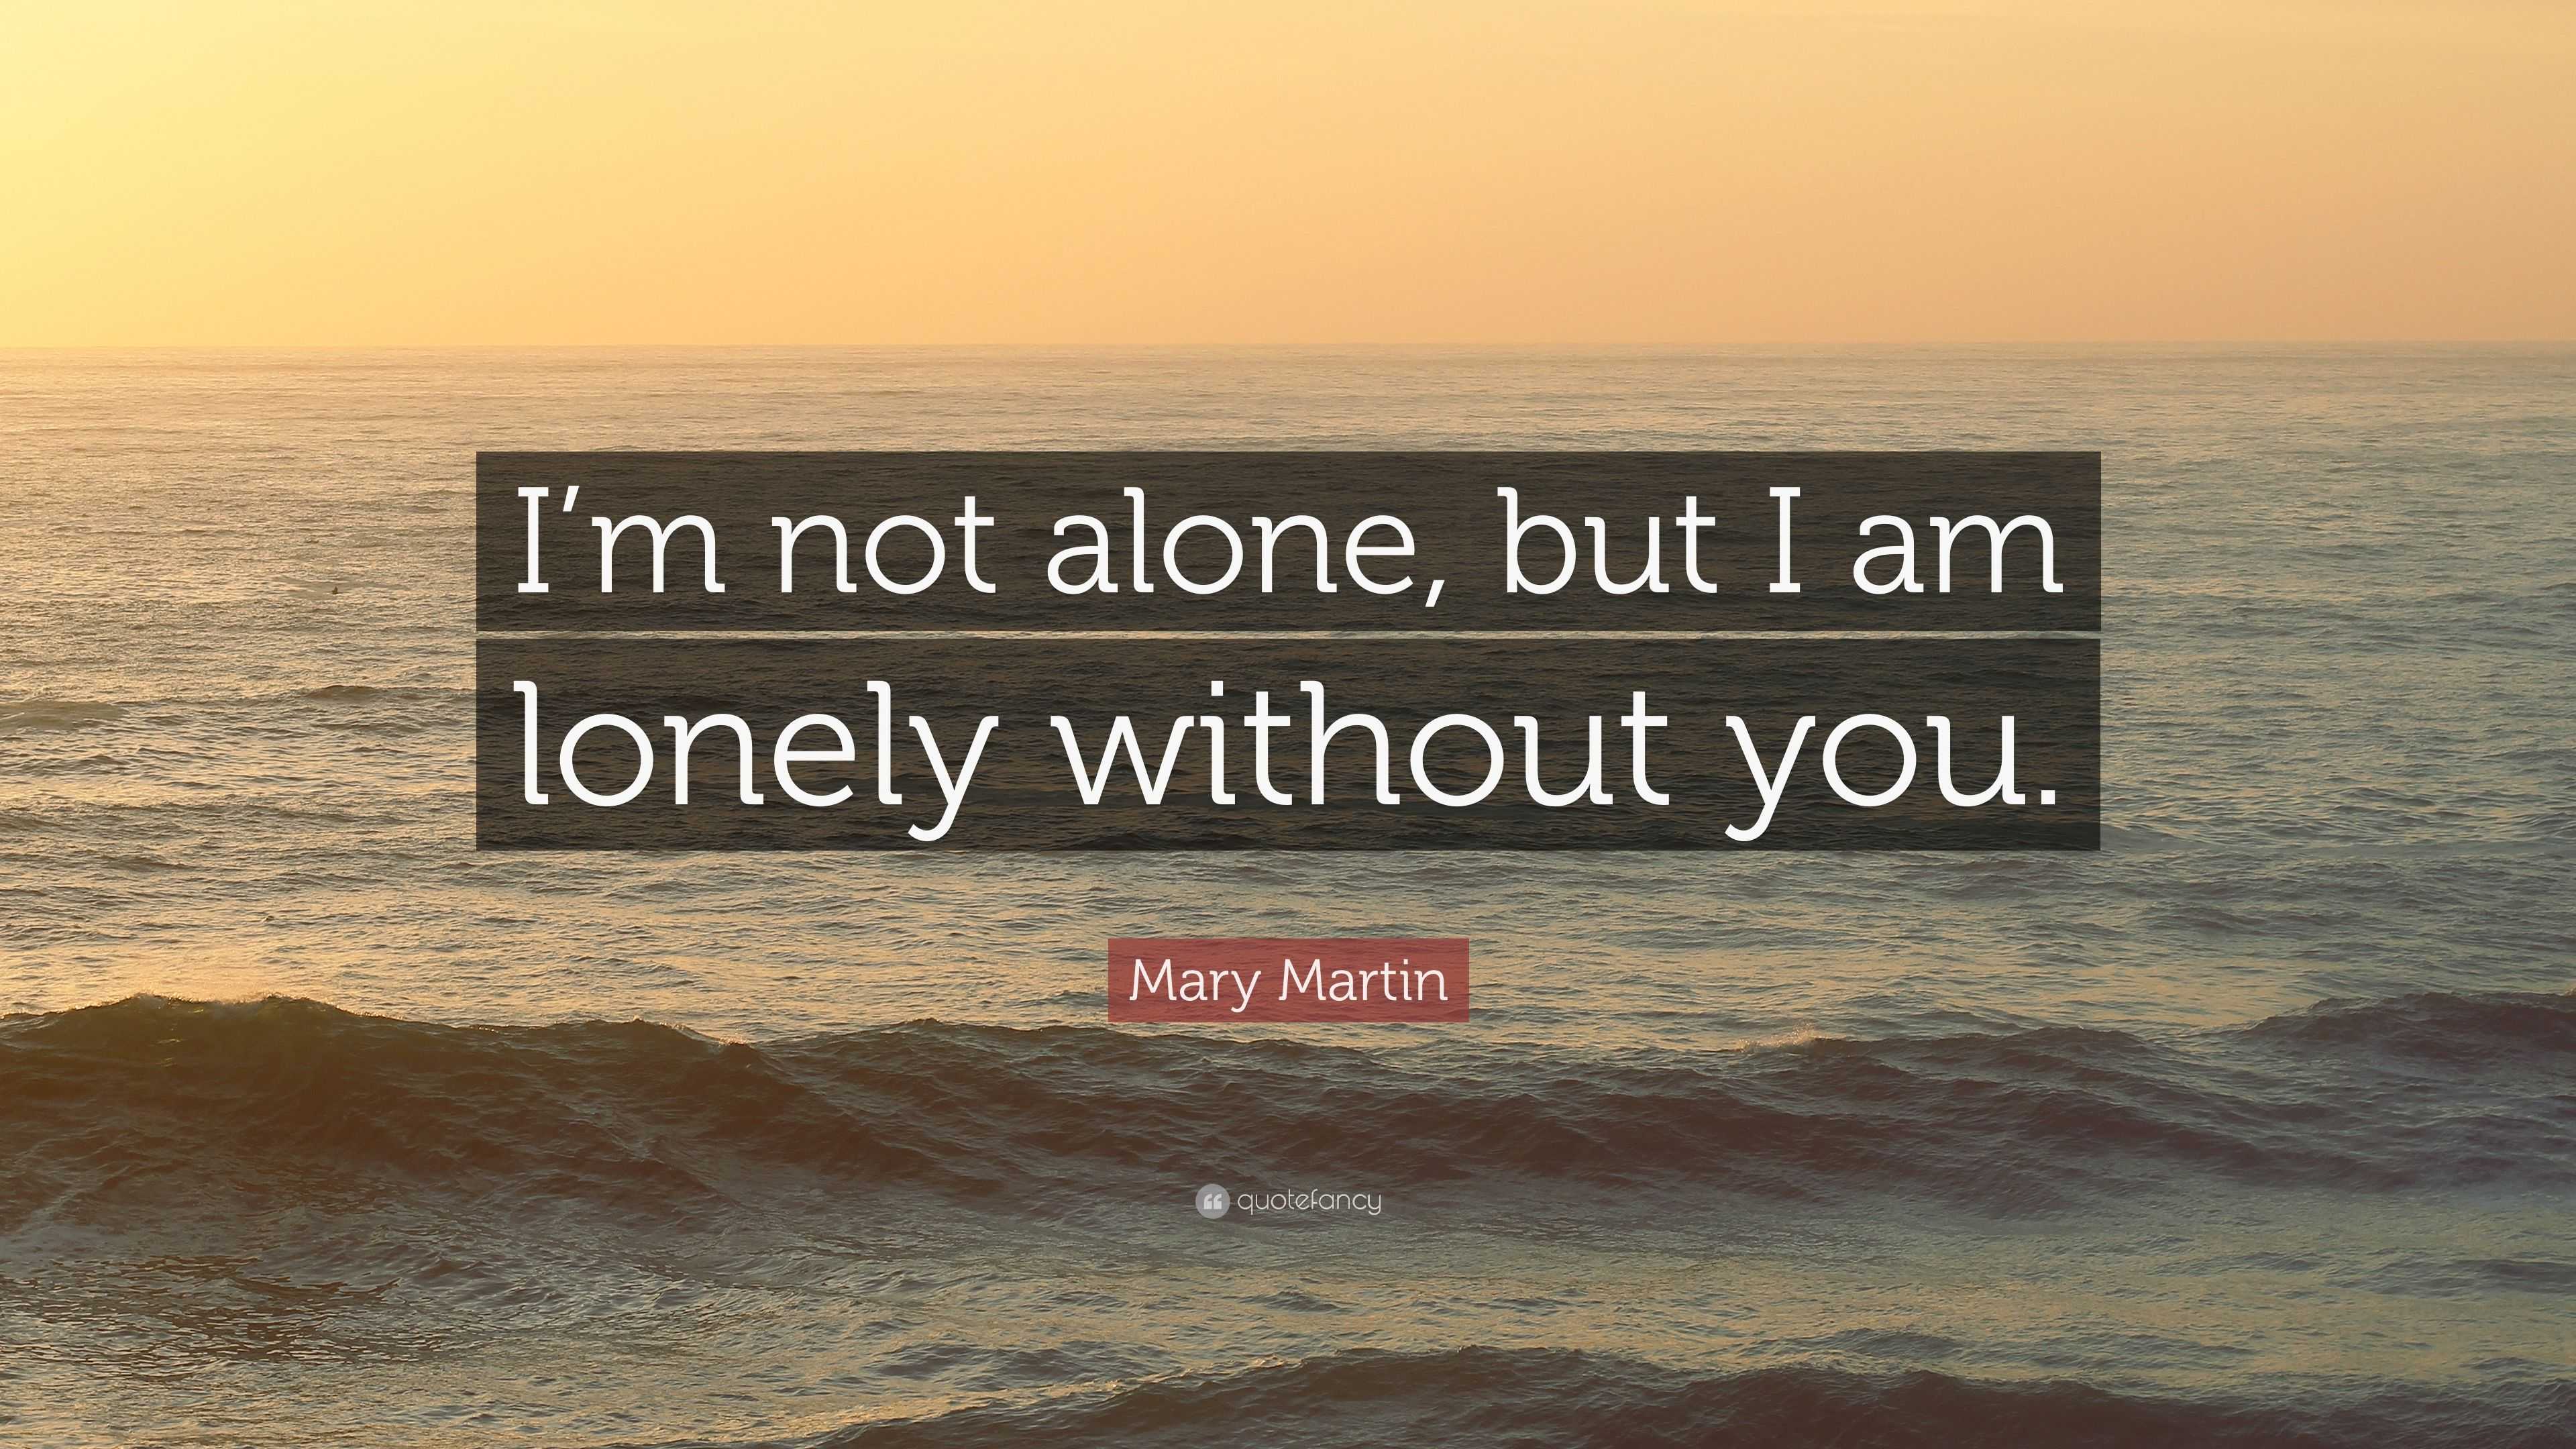 Mary Martin Quote: "I'm not alone, but I am lonely without ...